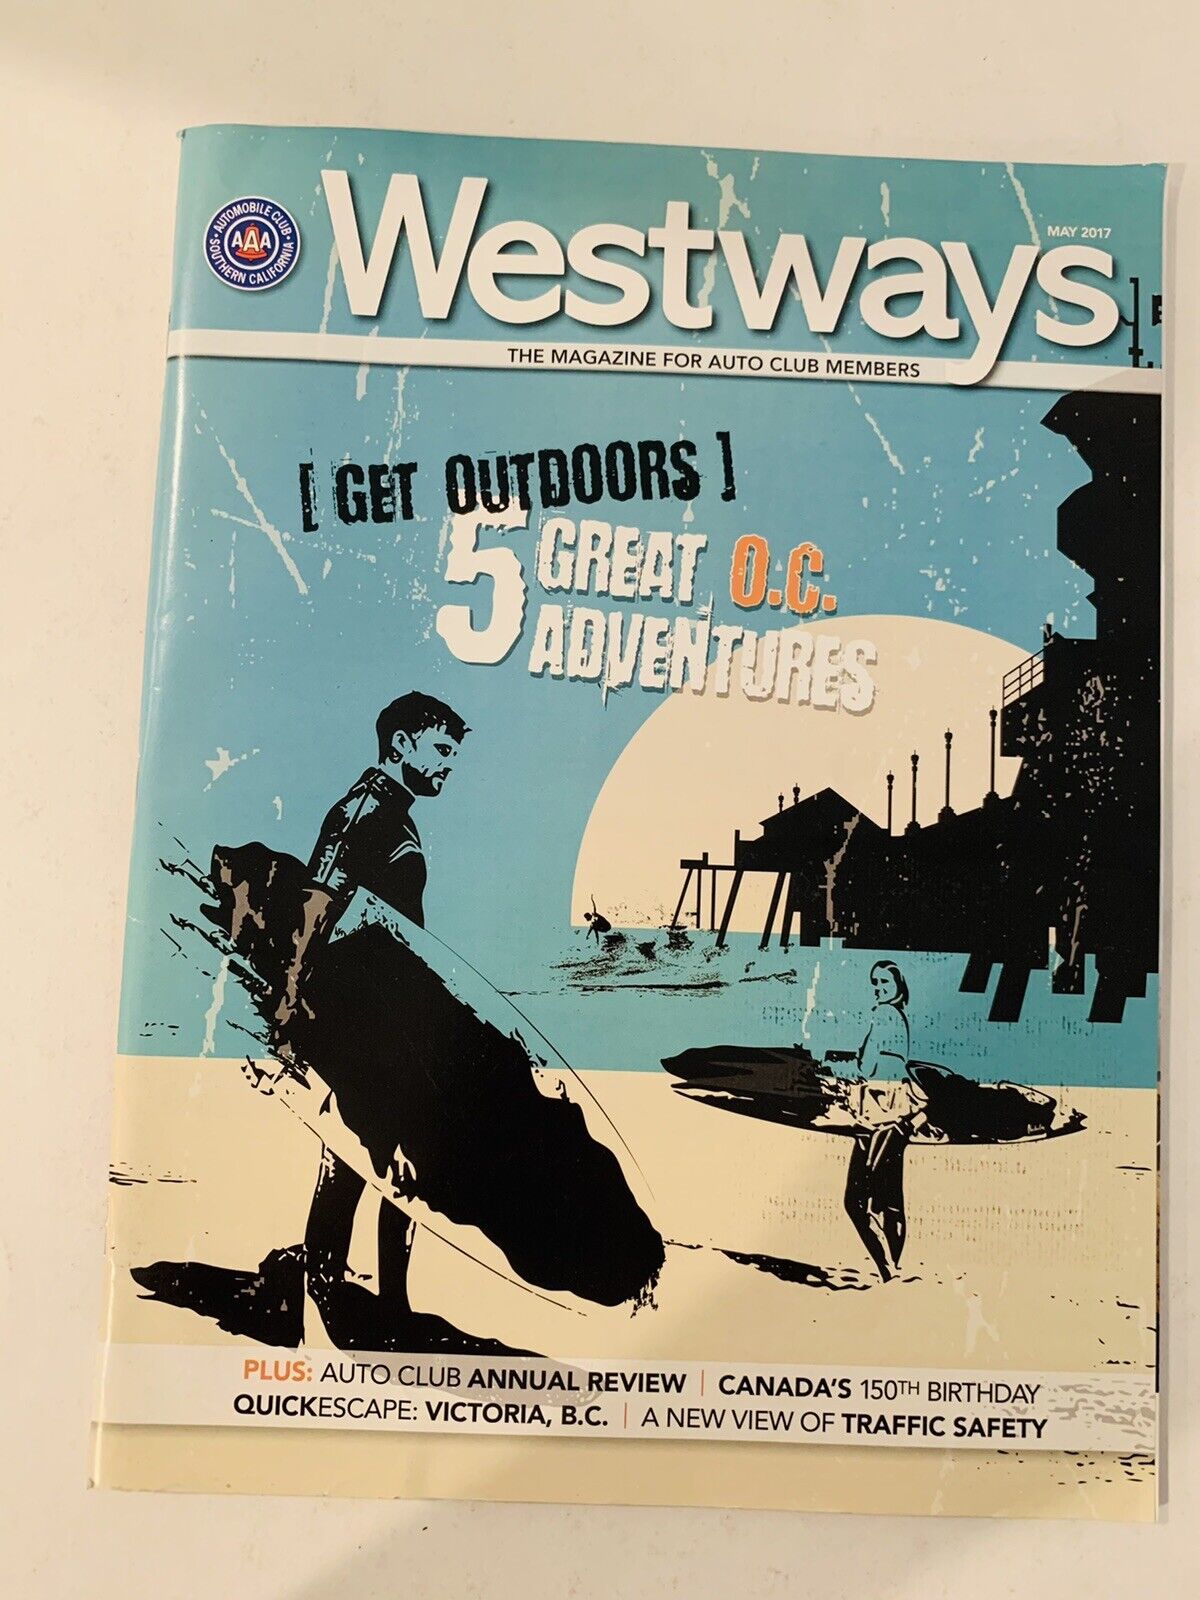 Primary image for AAA Westways May 2017 [Get Outdoors] 5 Great O.C. Adventures Magazine